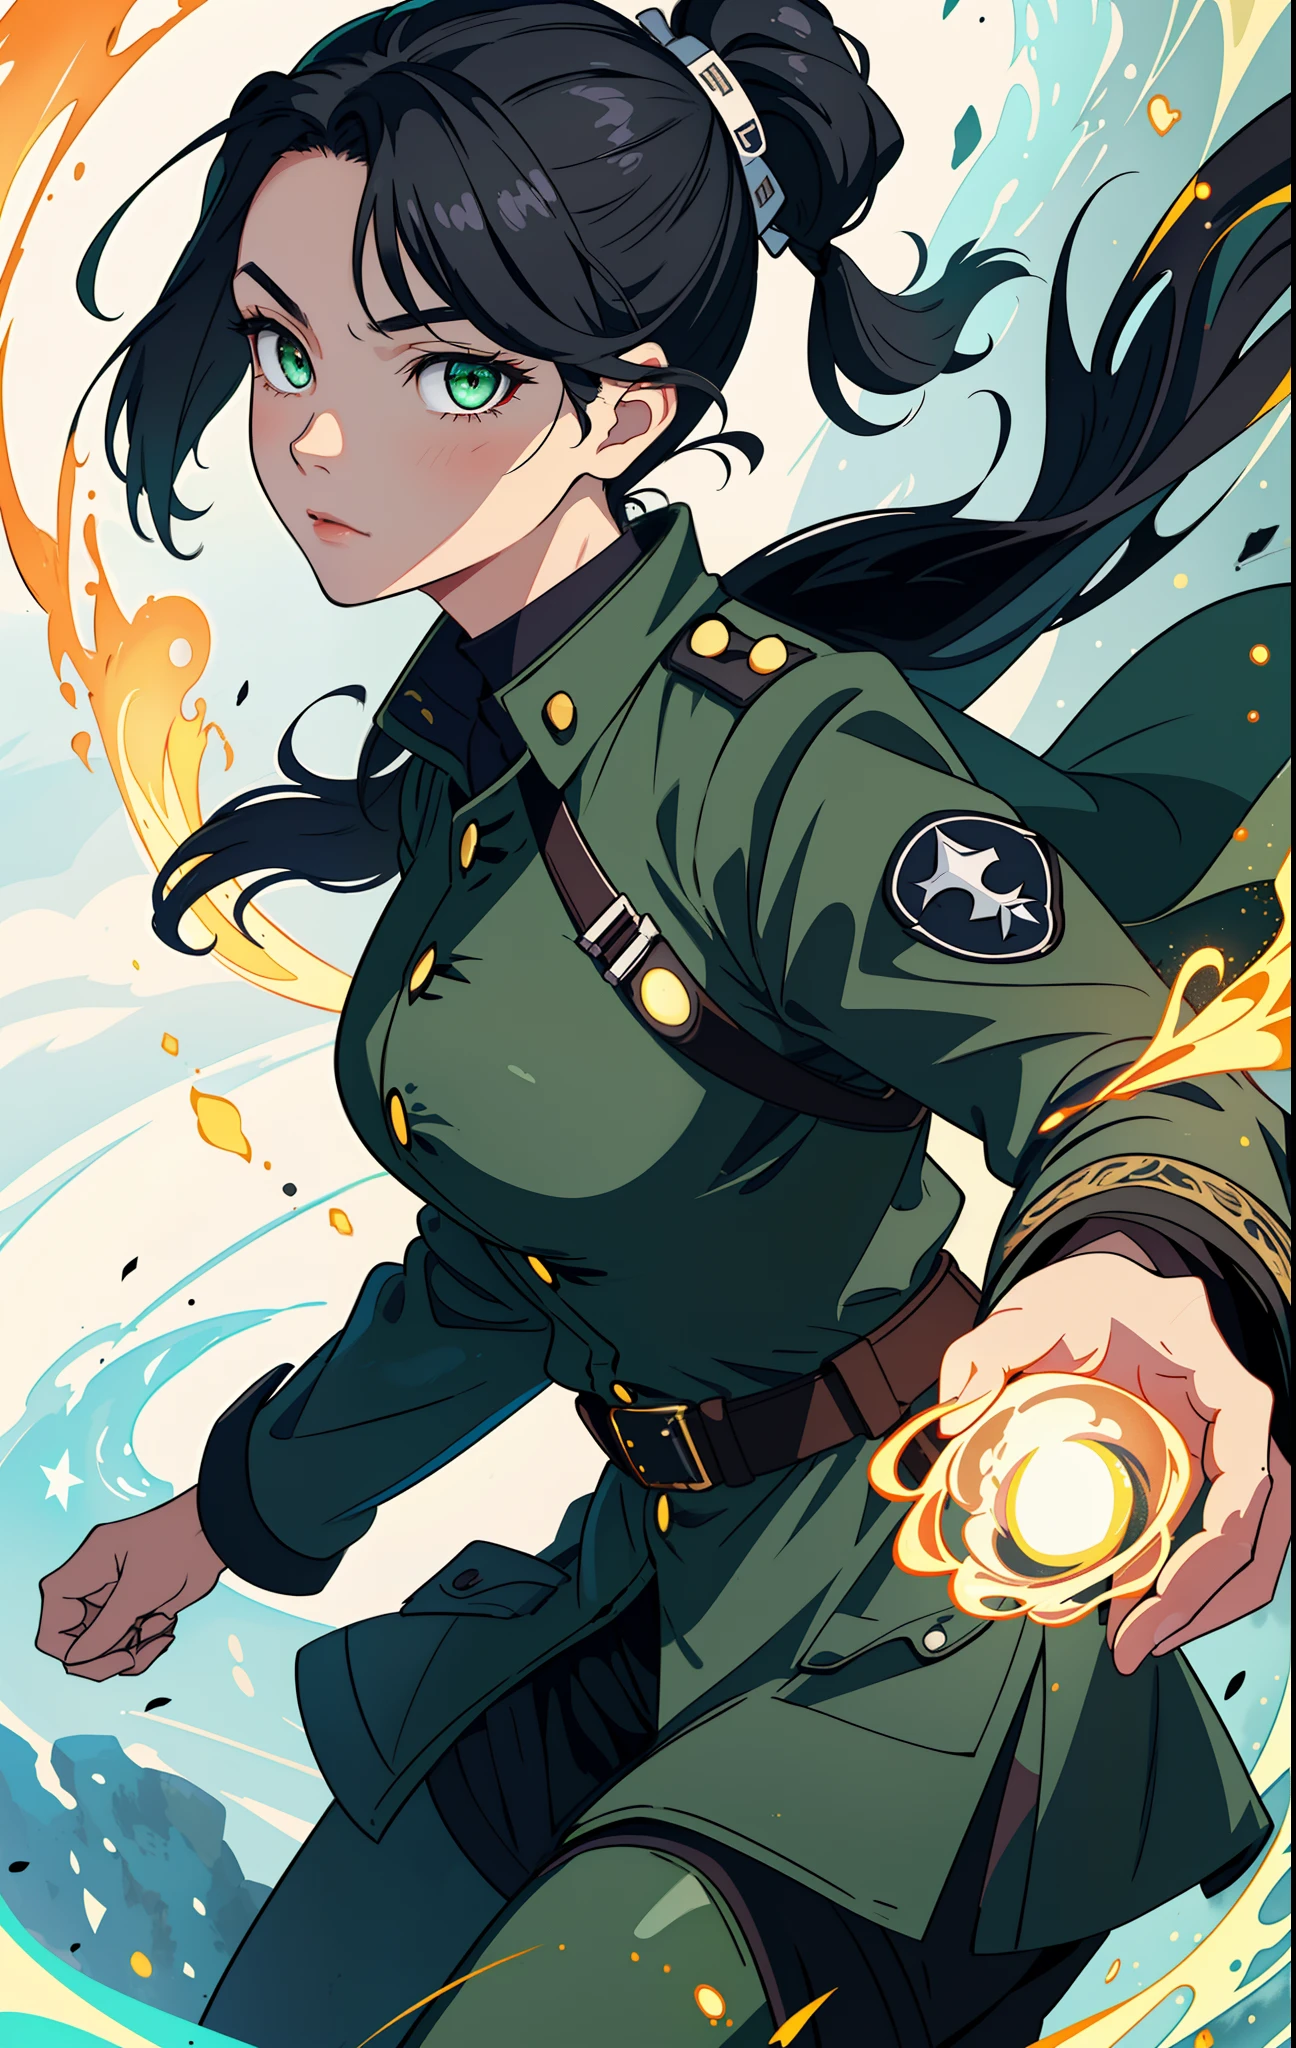 (((Best Quality)), ((Masterpiece)), (Detailed:1.4), 1women, solo, black hair, Green eyes, pony tail, glowing eyes, , a perfect face, Military uniform of the German Empire, Khaki raincoat, combat boots, Prehistory of the Kaiser's Empire, Morning lighting, Casting magic spells, The magic of the wind, Ethereal luminous aura,), ( military uniform), big breastes